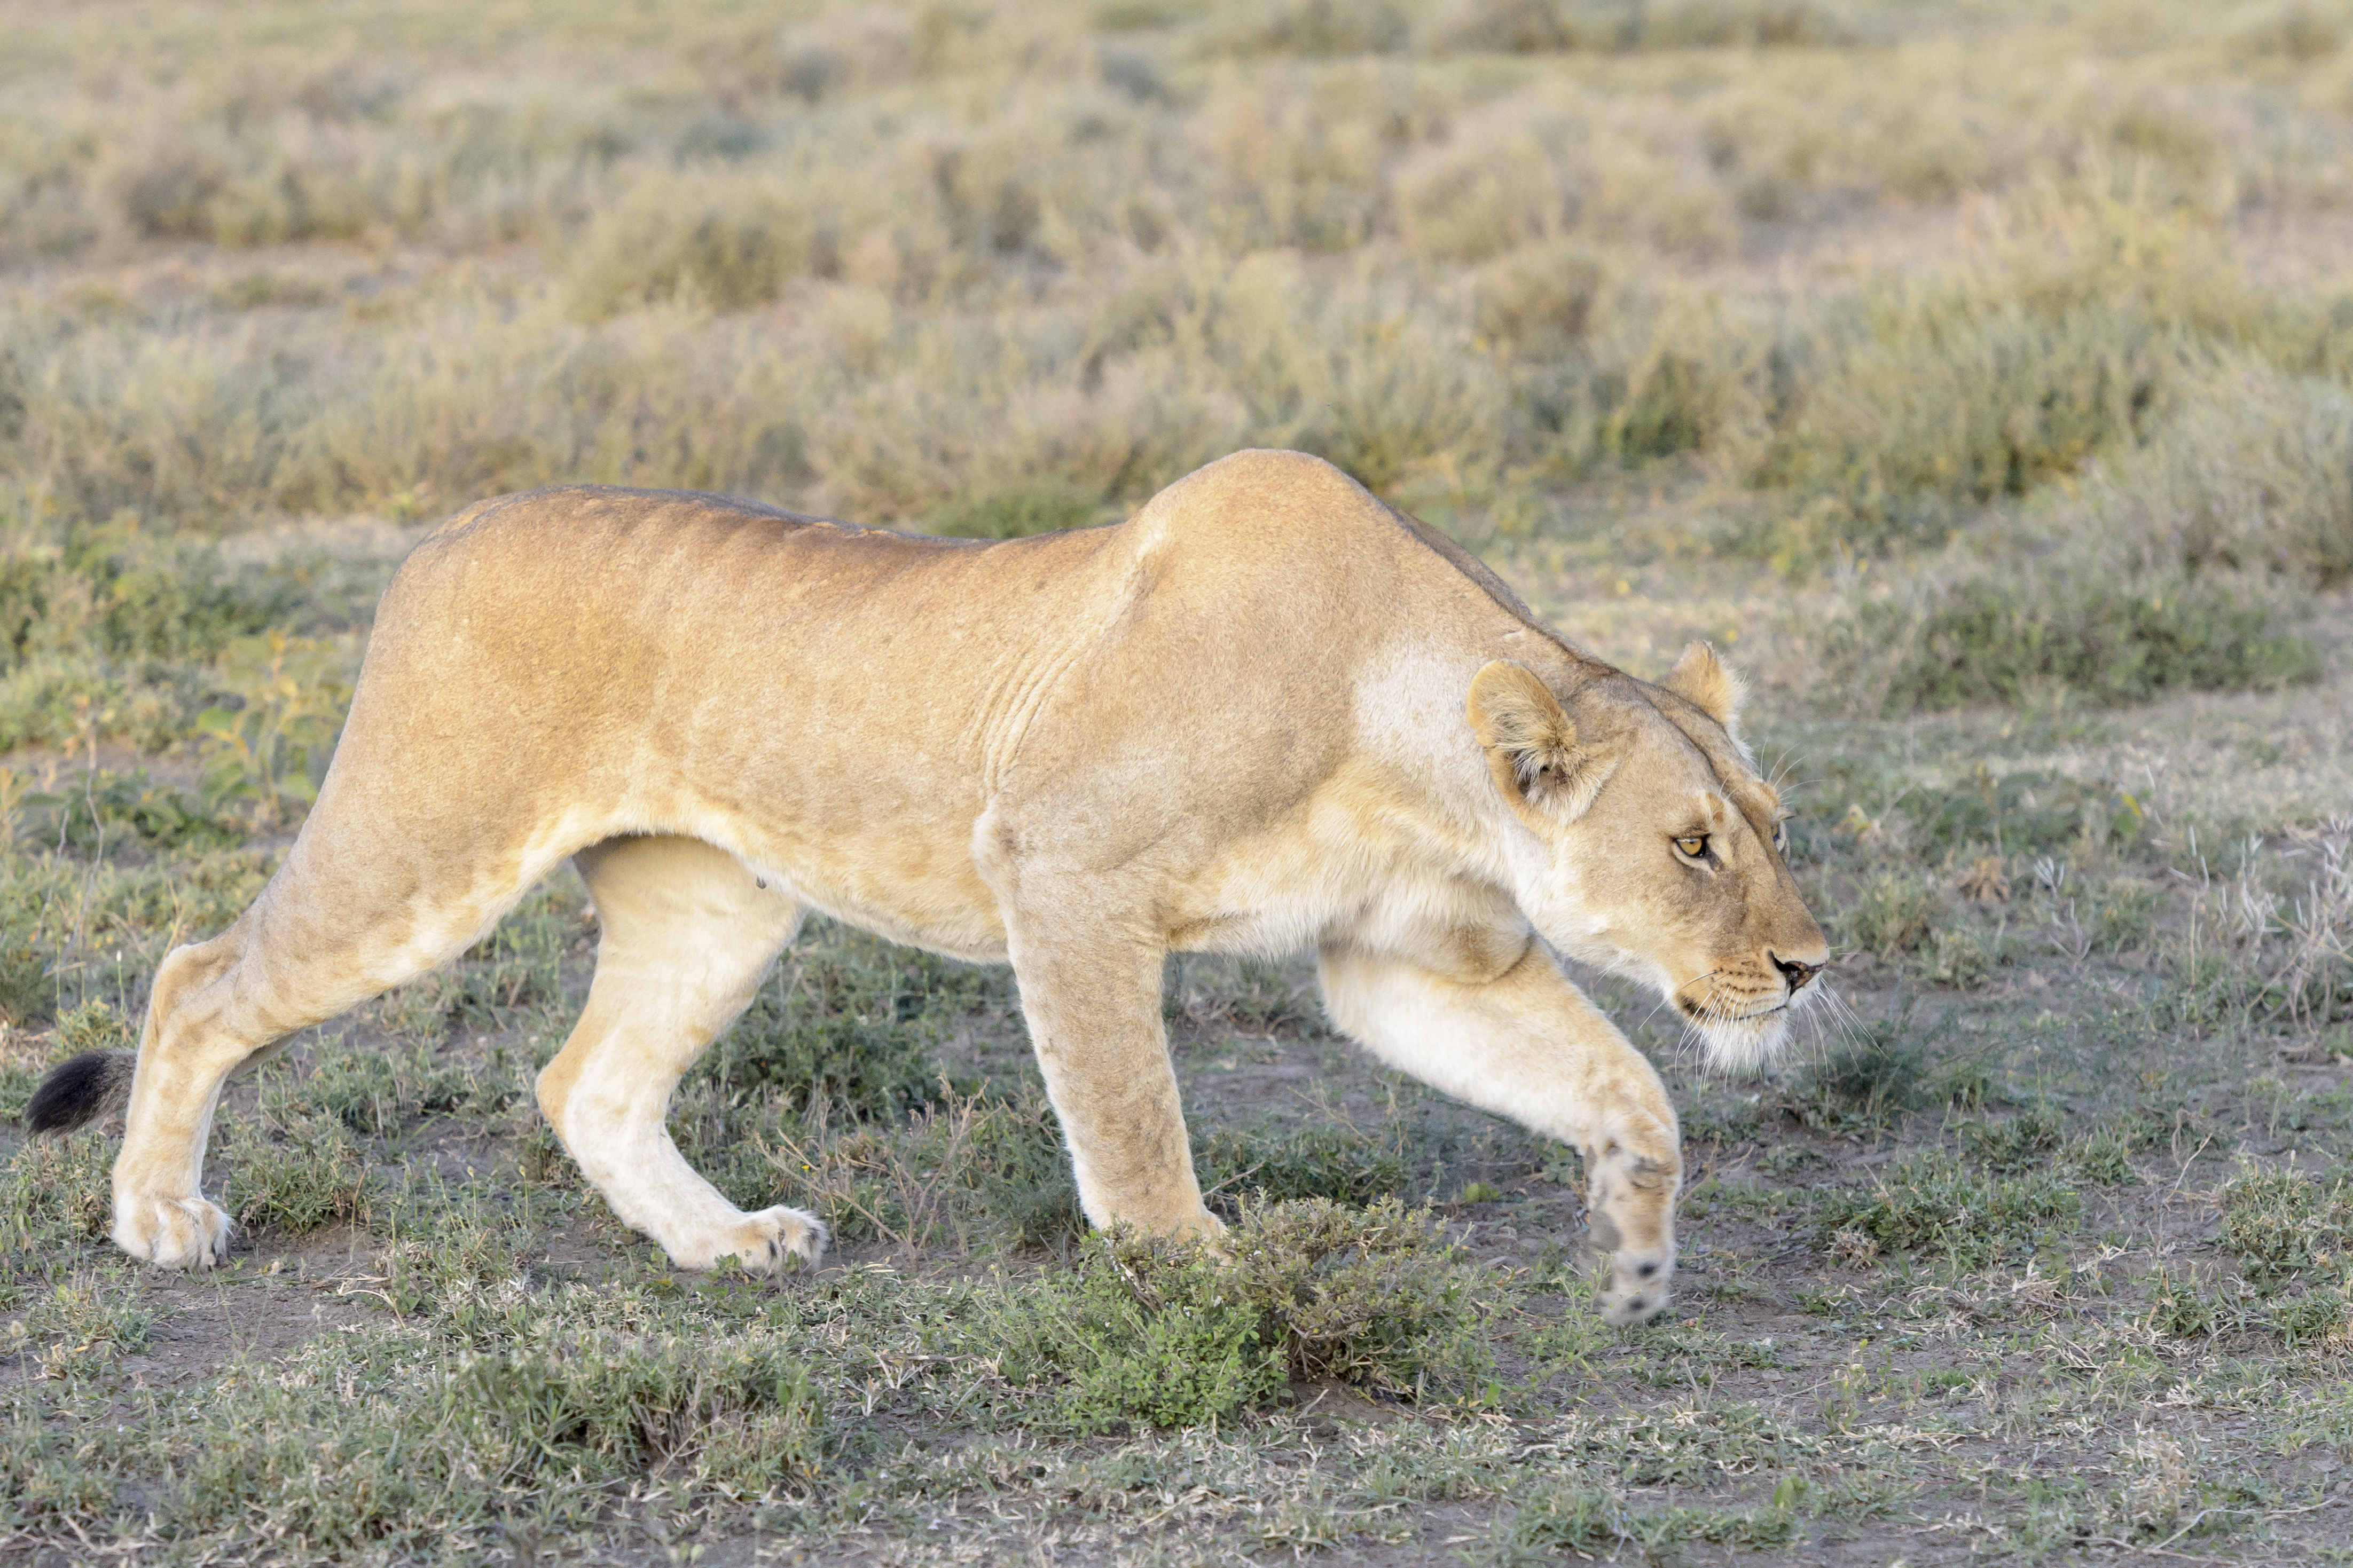 Photo: side view of a lioness stalking prey in a field of short, patchy green grass.